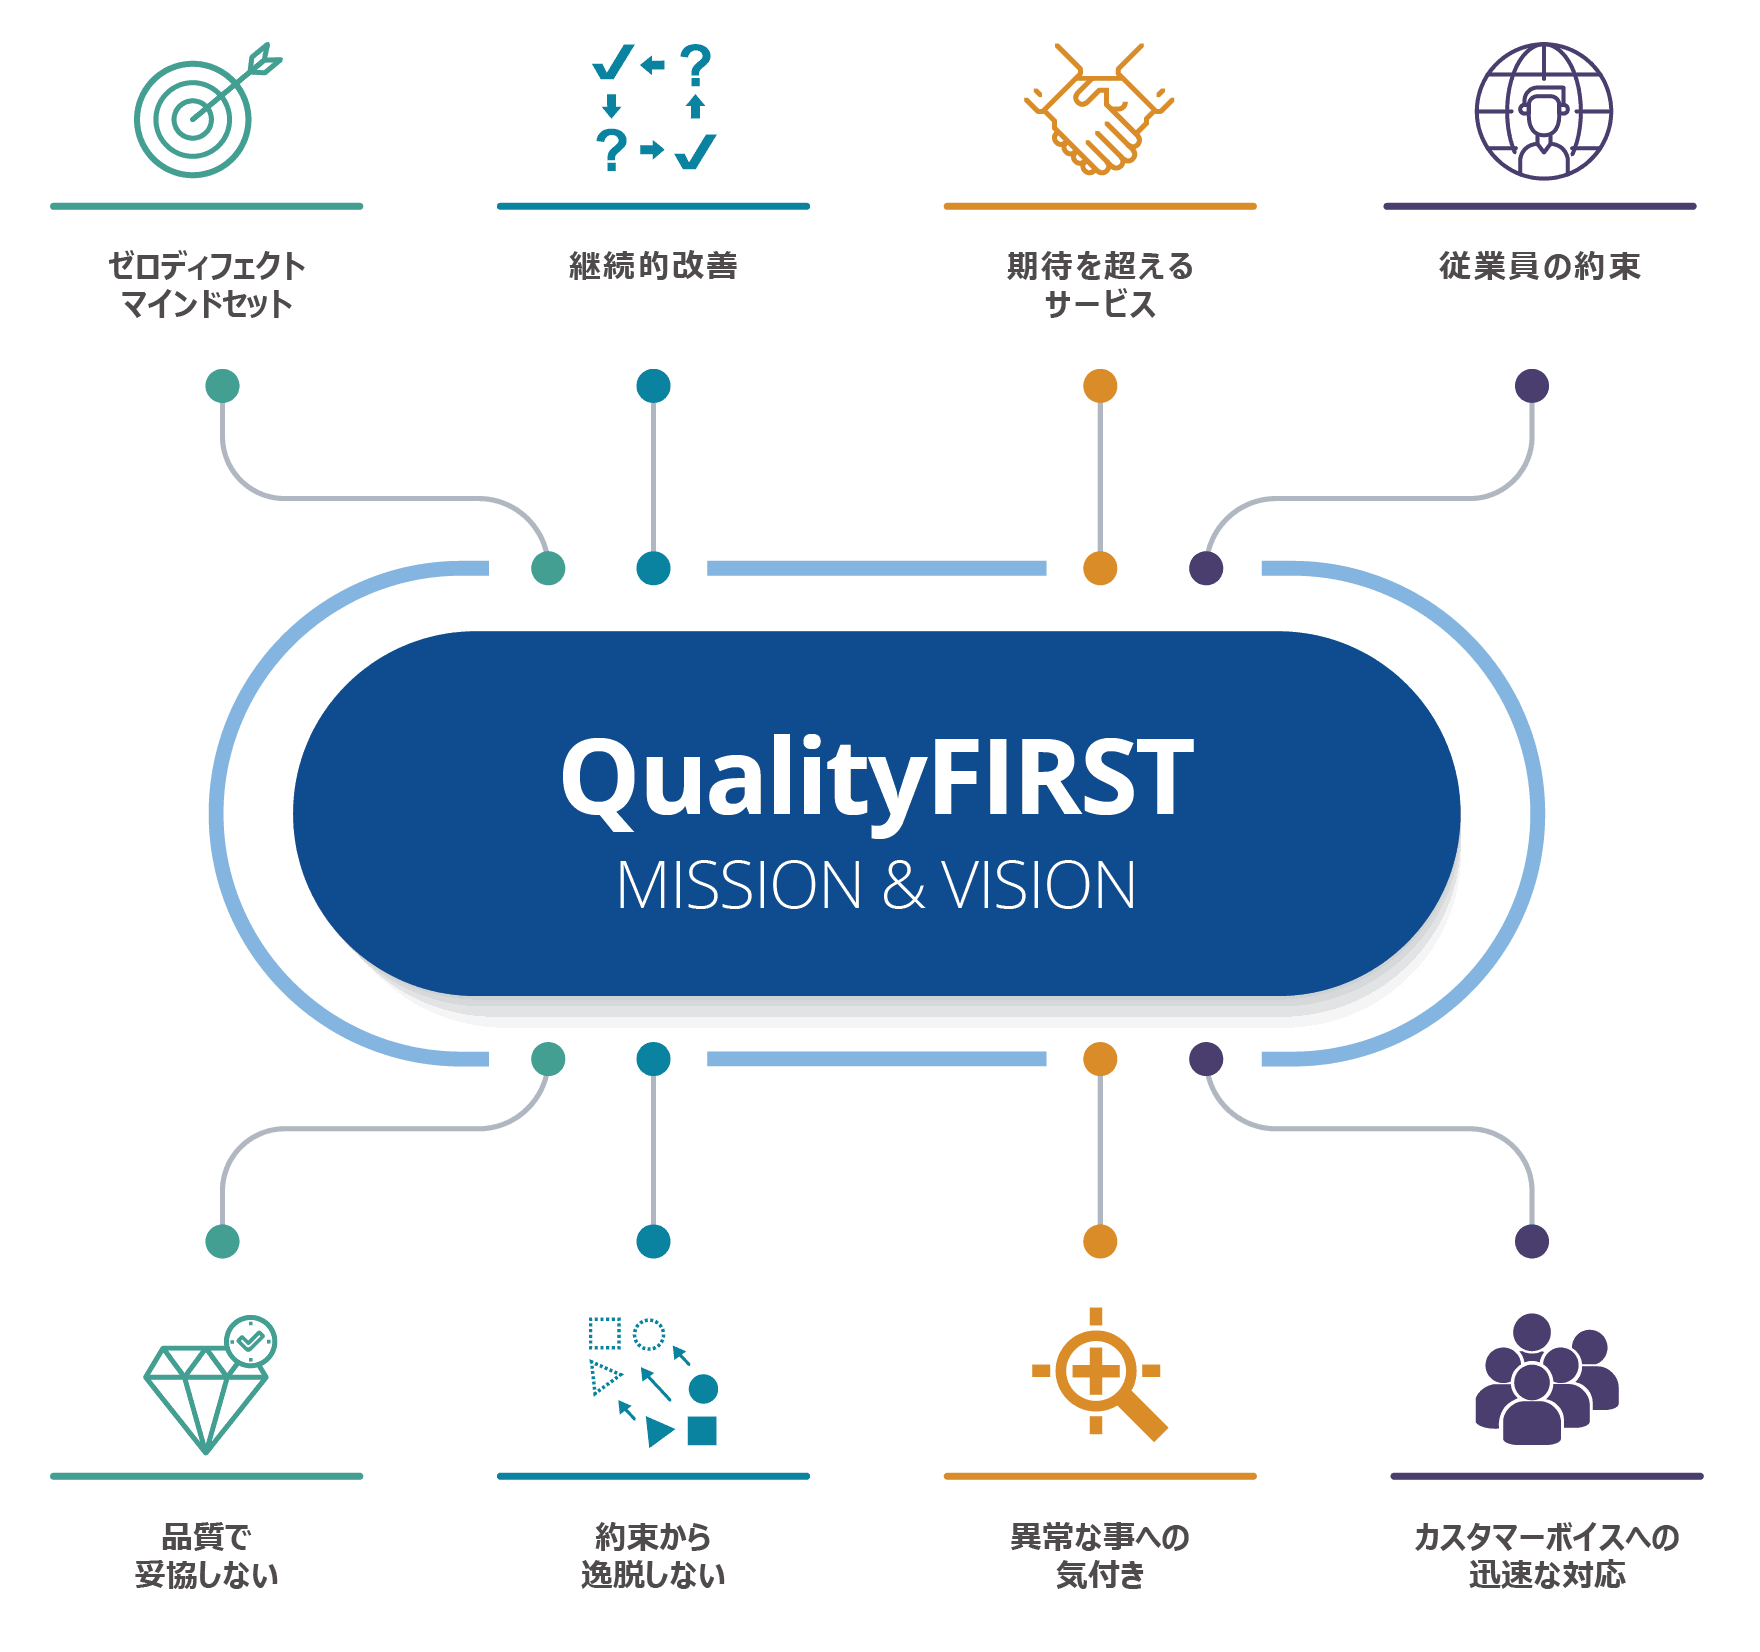 Amkor Quality First mission and vision Infographic